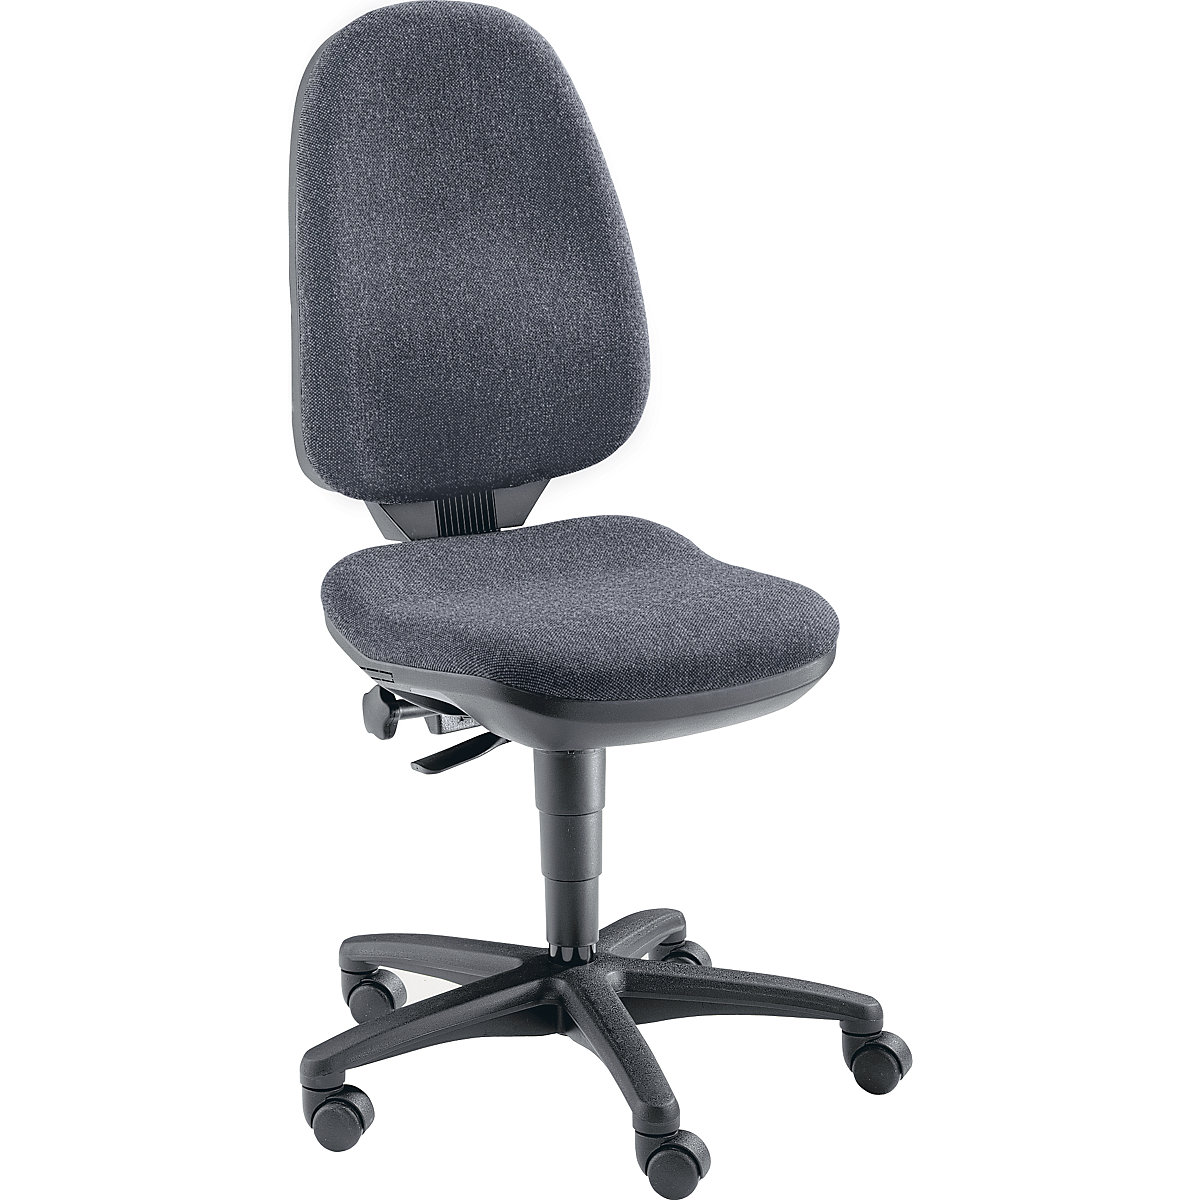 Ergonomic swivel chair – Topstar, without arm rests, fabric covering anthracite-3